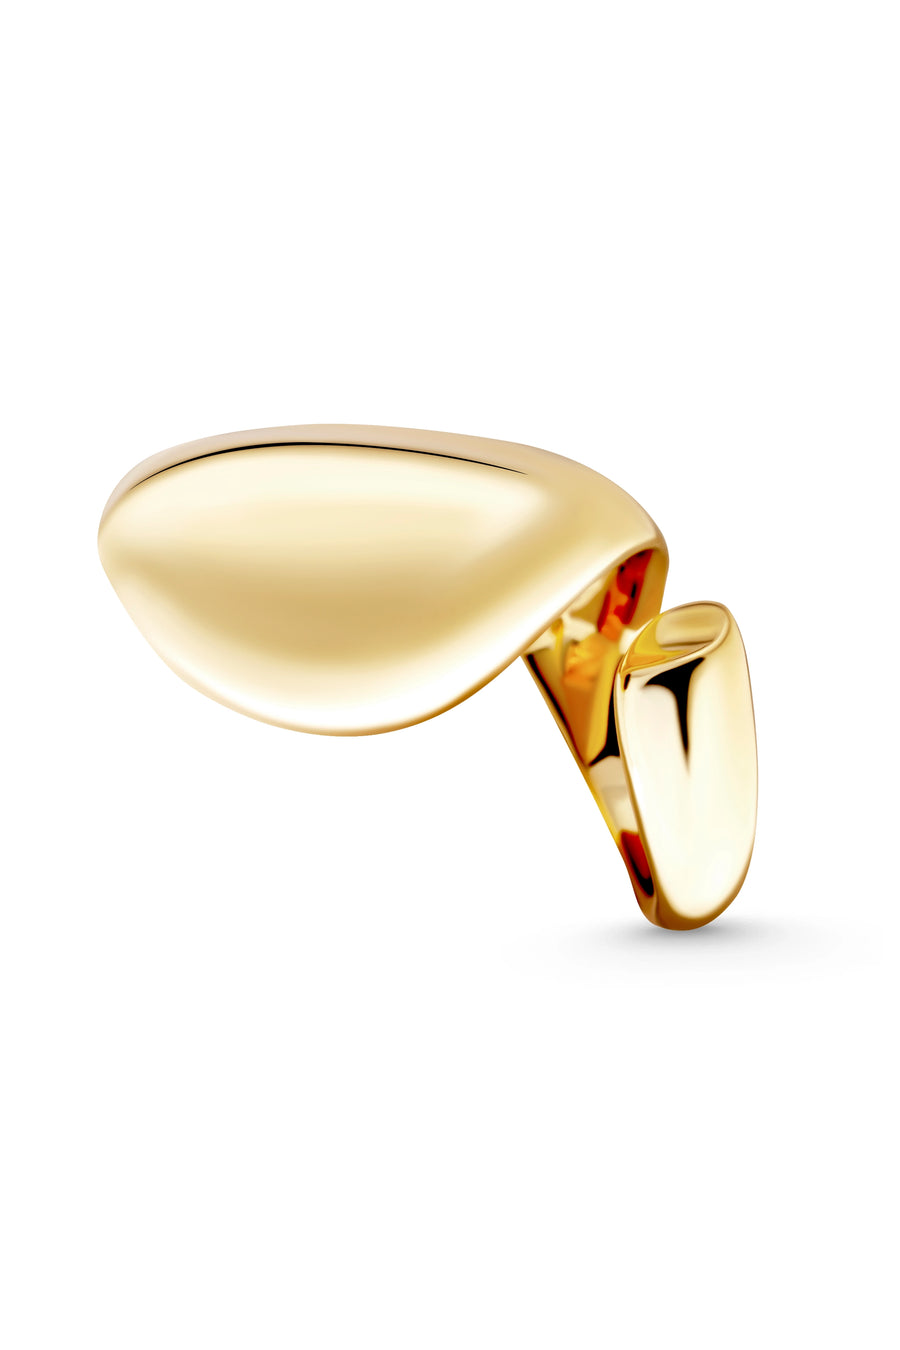 OMNI Ring. Ring topped with bulging broad plate in high gloss finish, open-ended, can fit with US sizes 5-7, 18K gold vermeil, handmade, hypoallergenic, water-resistant